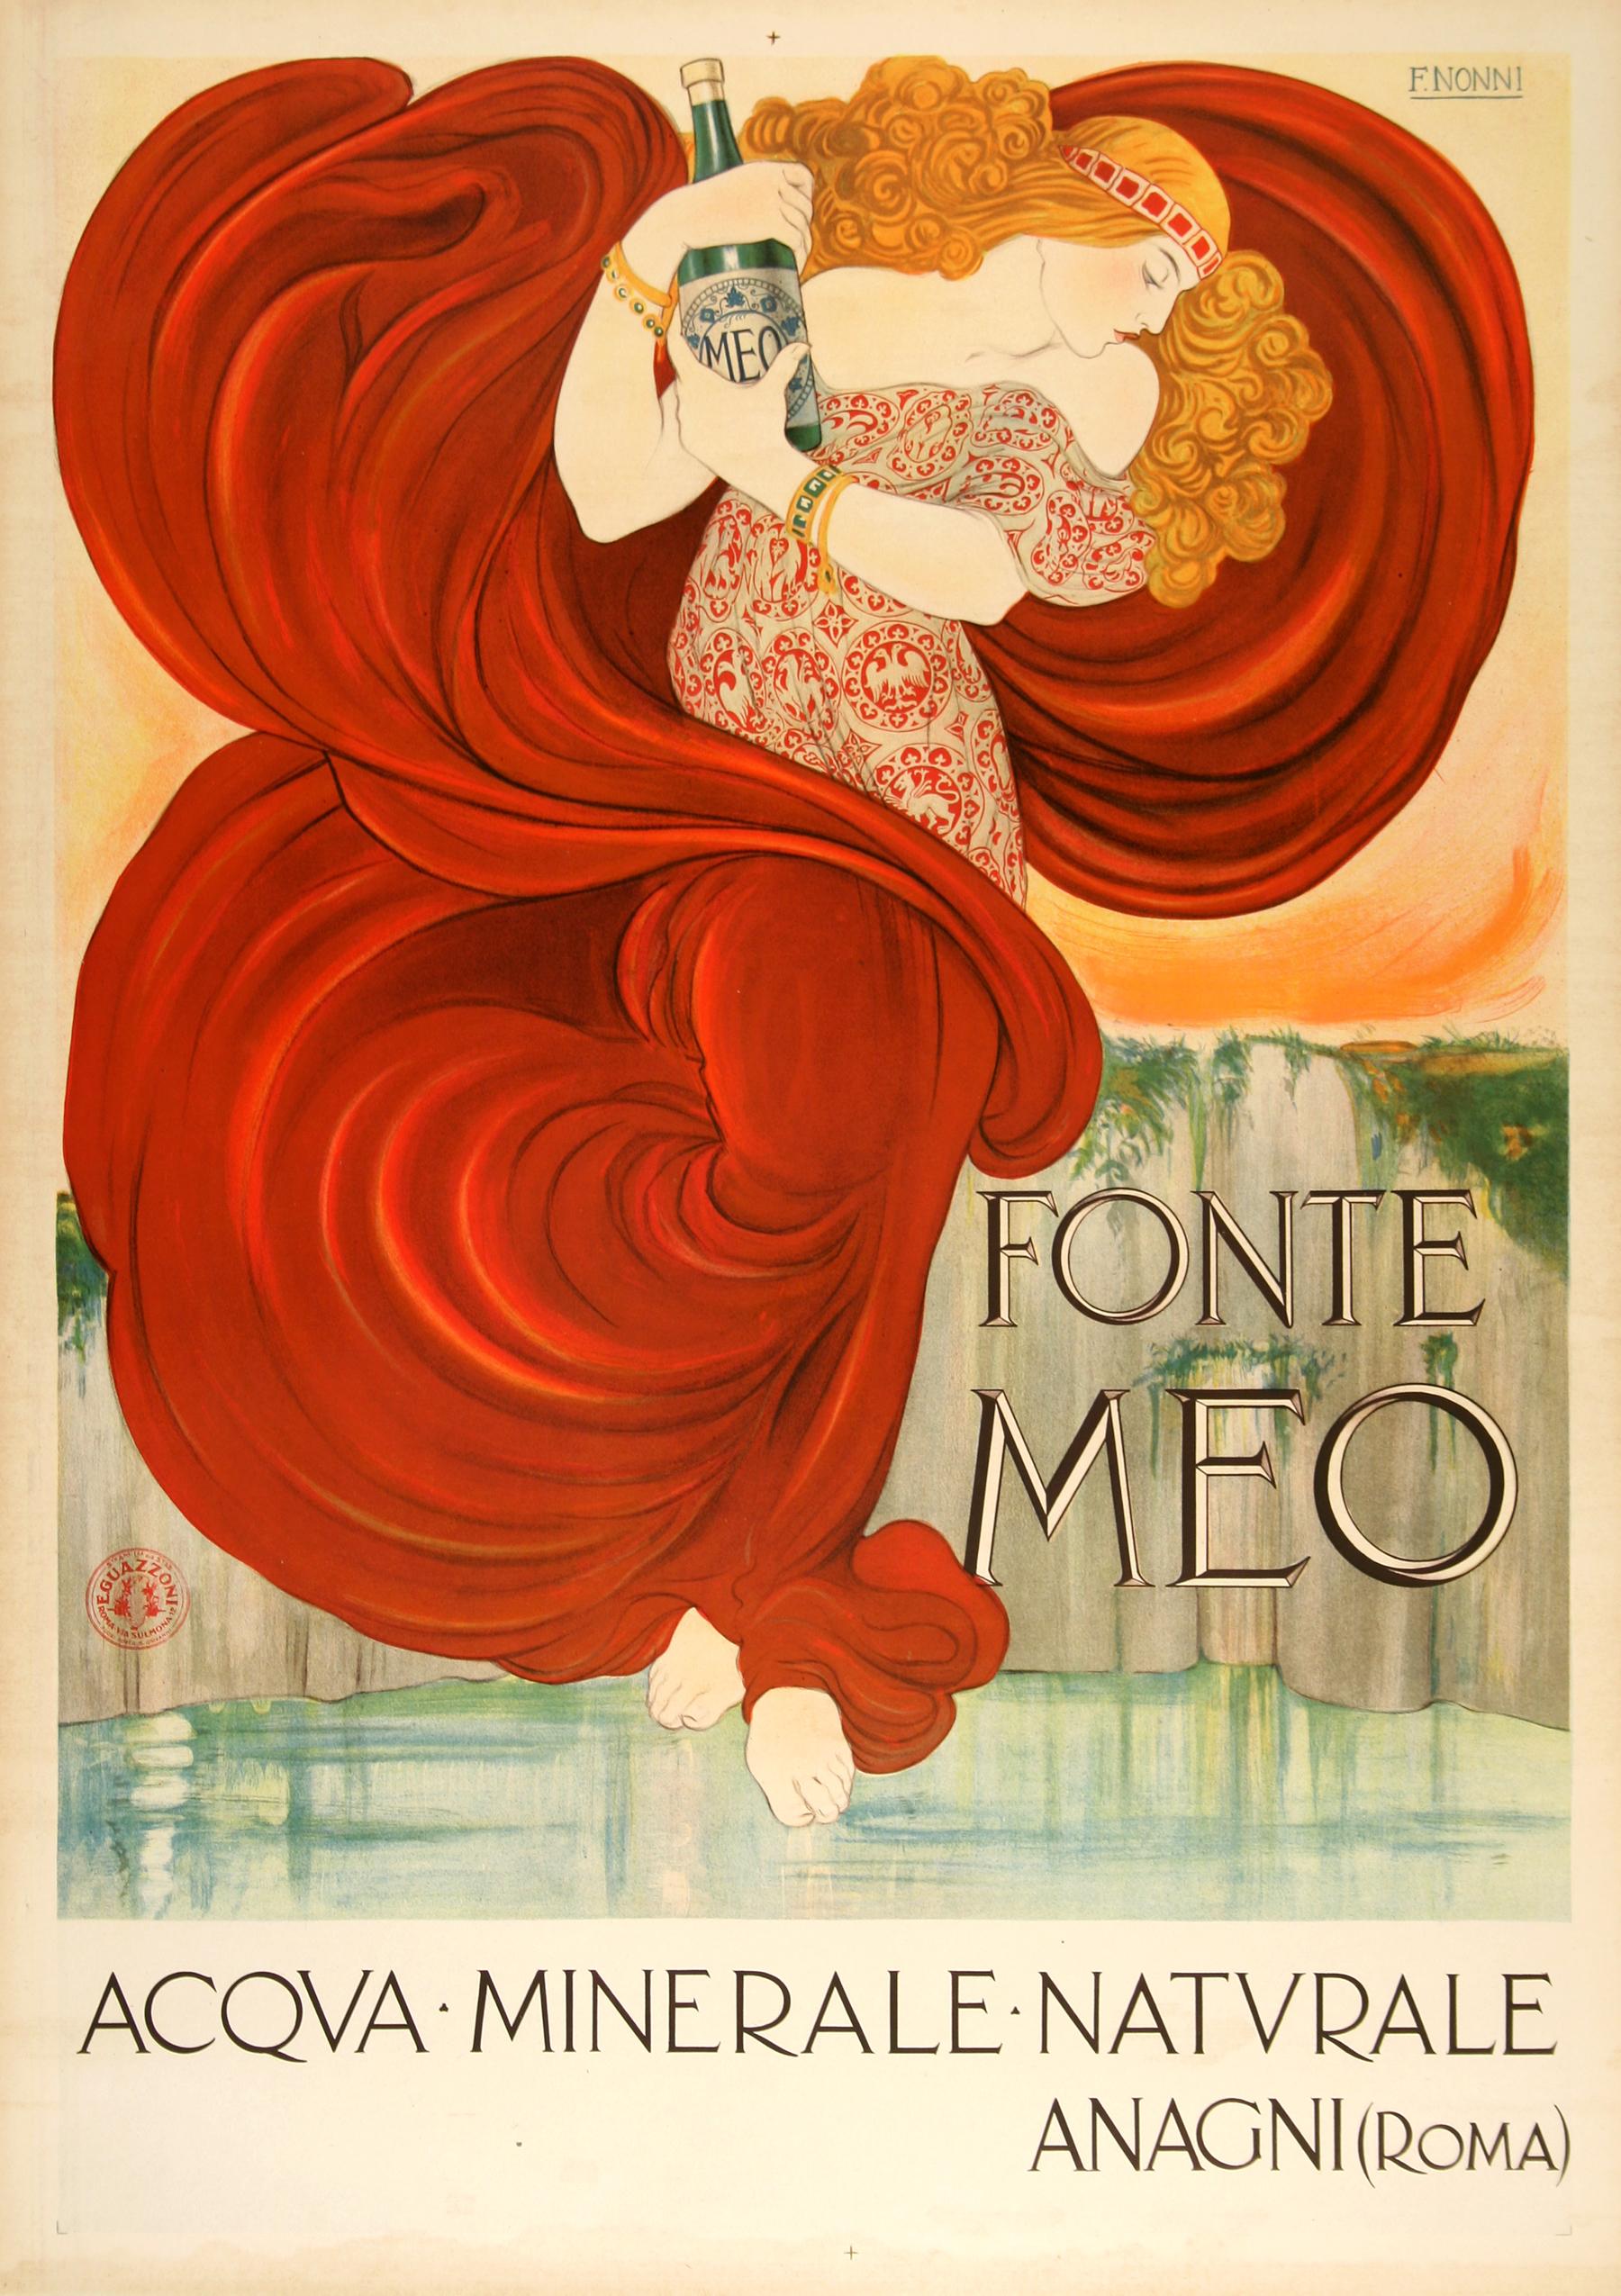 The Italian influence of style is clearly evident in this fine poster created circa 1910 by the artist, Nonni. He uses the influence of the Arts Nouveau of France but puts his unique style twist on it. The product is a mineral water but one